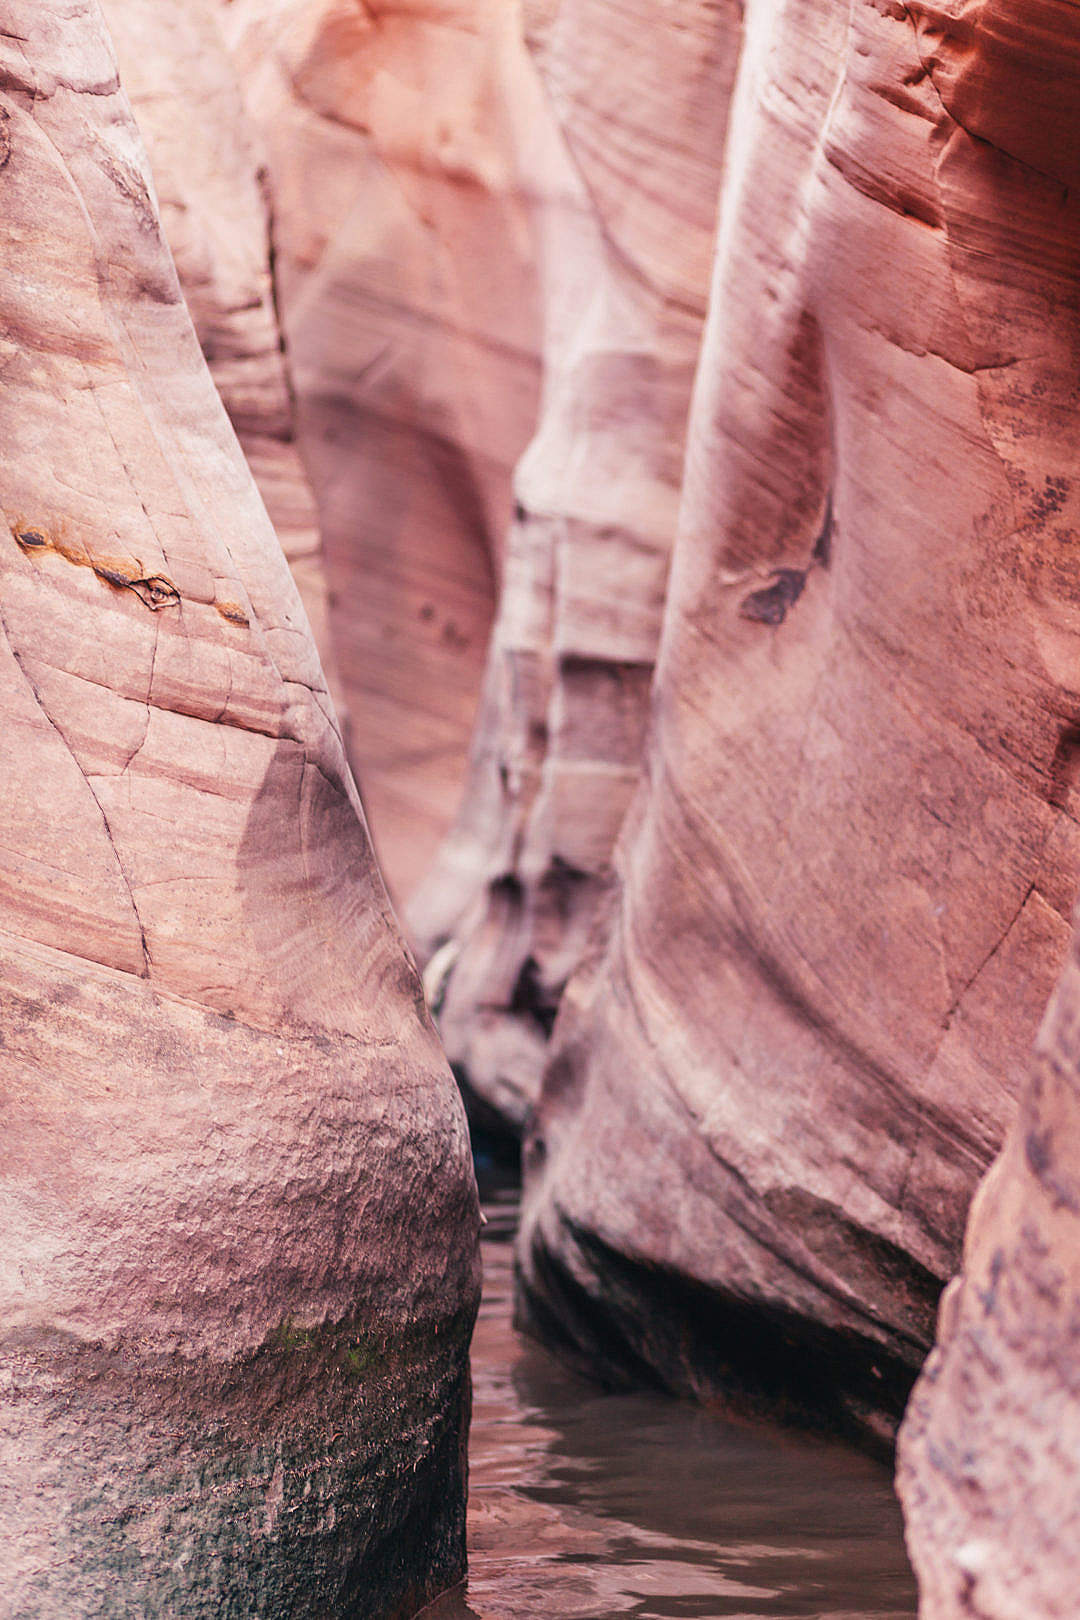 Download Flooded Slot Canyon in Utah FREE Stock Photo